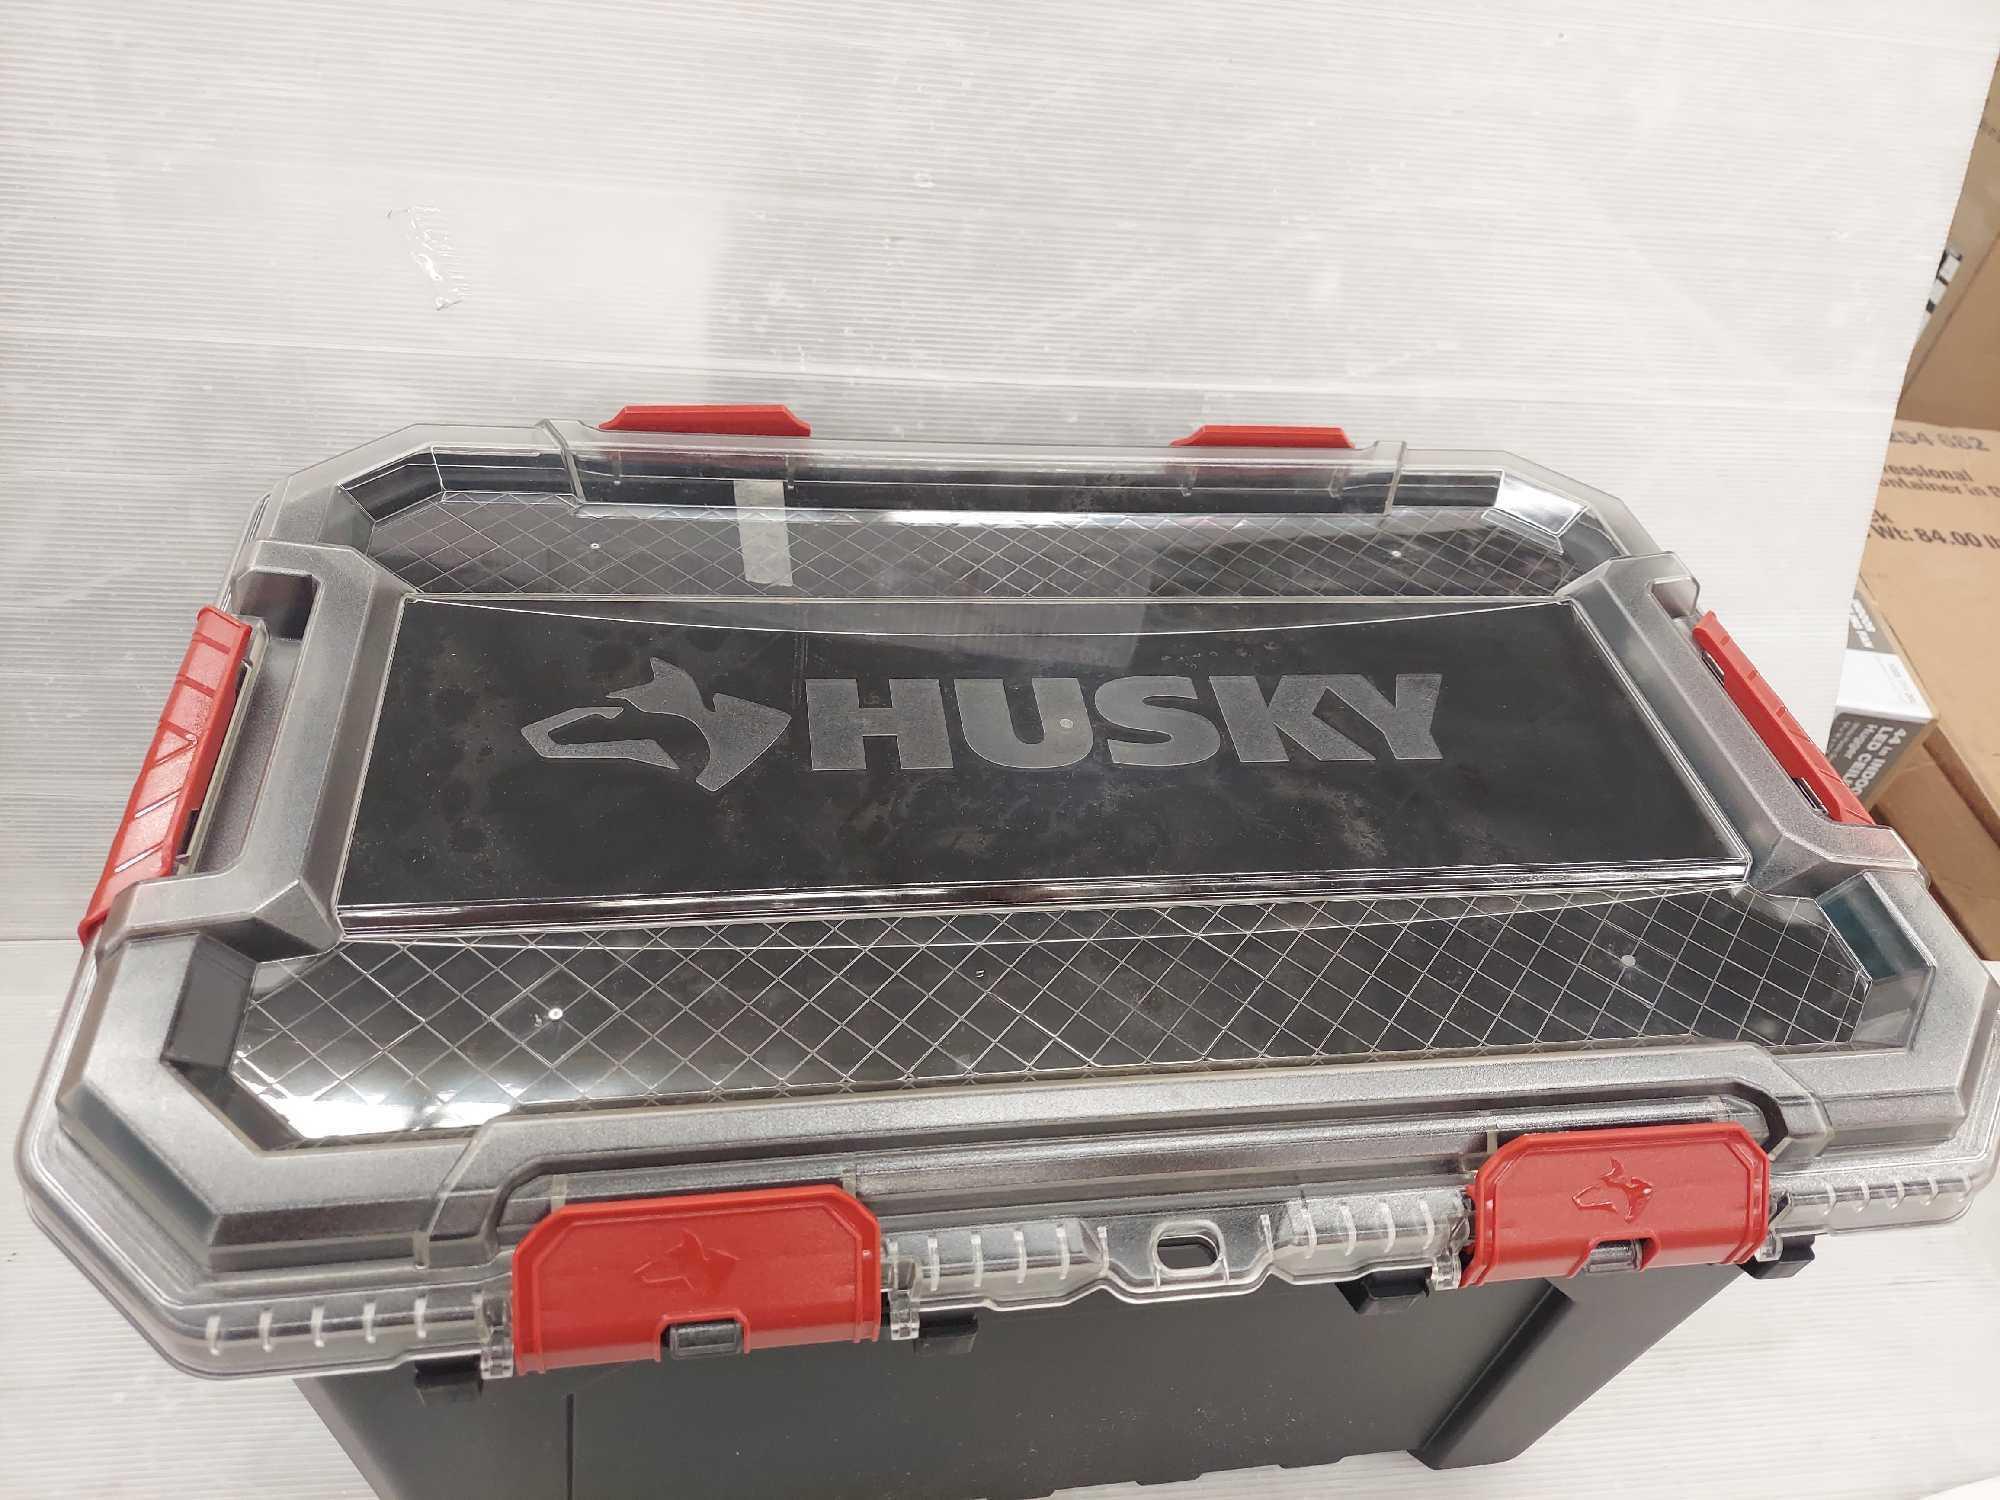 Husky 20 Gal. Professional Duty Waterproof Storage Container with